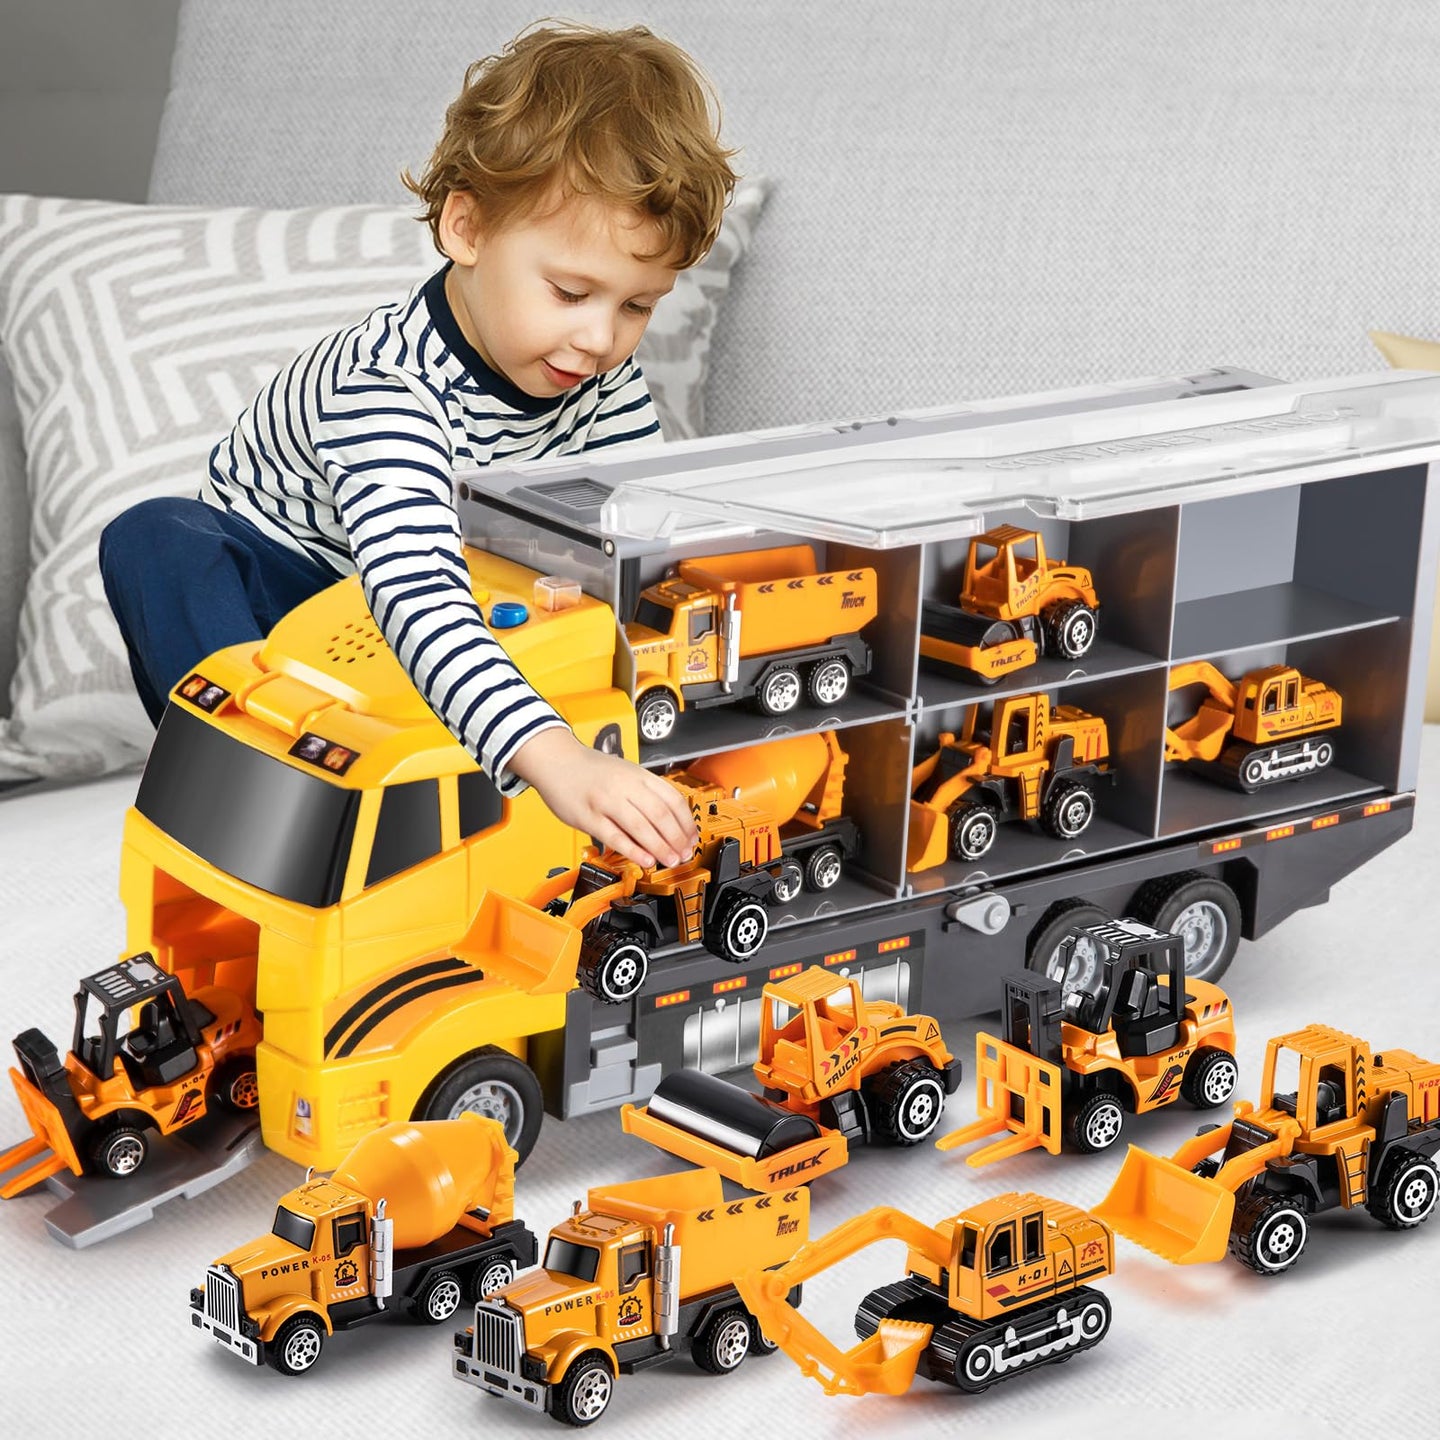 TEMI Toddler Toys for 3 4 5 6 Years Old Boys, Die-cast Construction Car Carrier Vehicle Toy Set w/Play Mat, Truck Alloy Metal Age 3-9 Toddlers Kids Boys & Girls